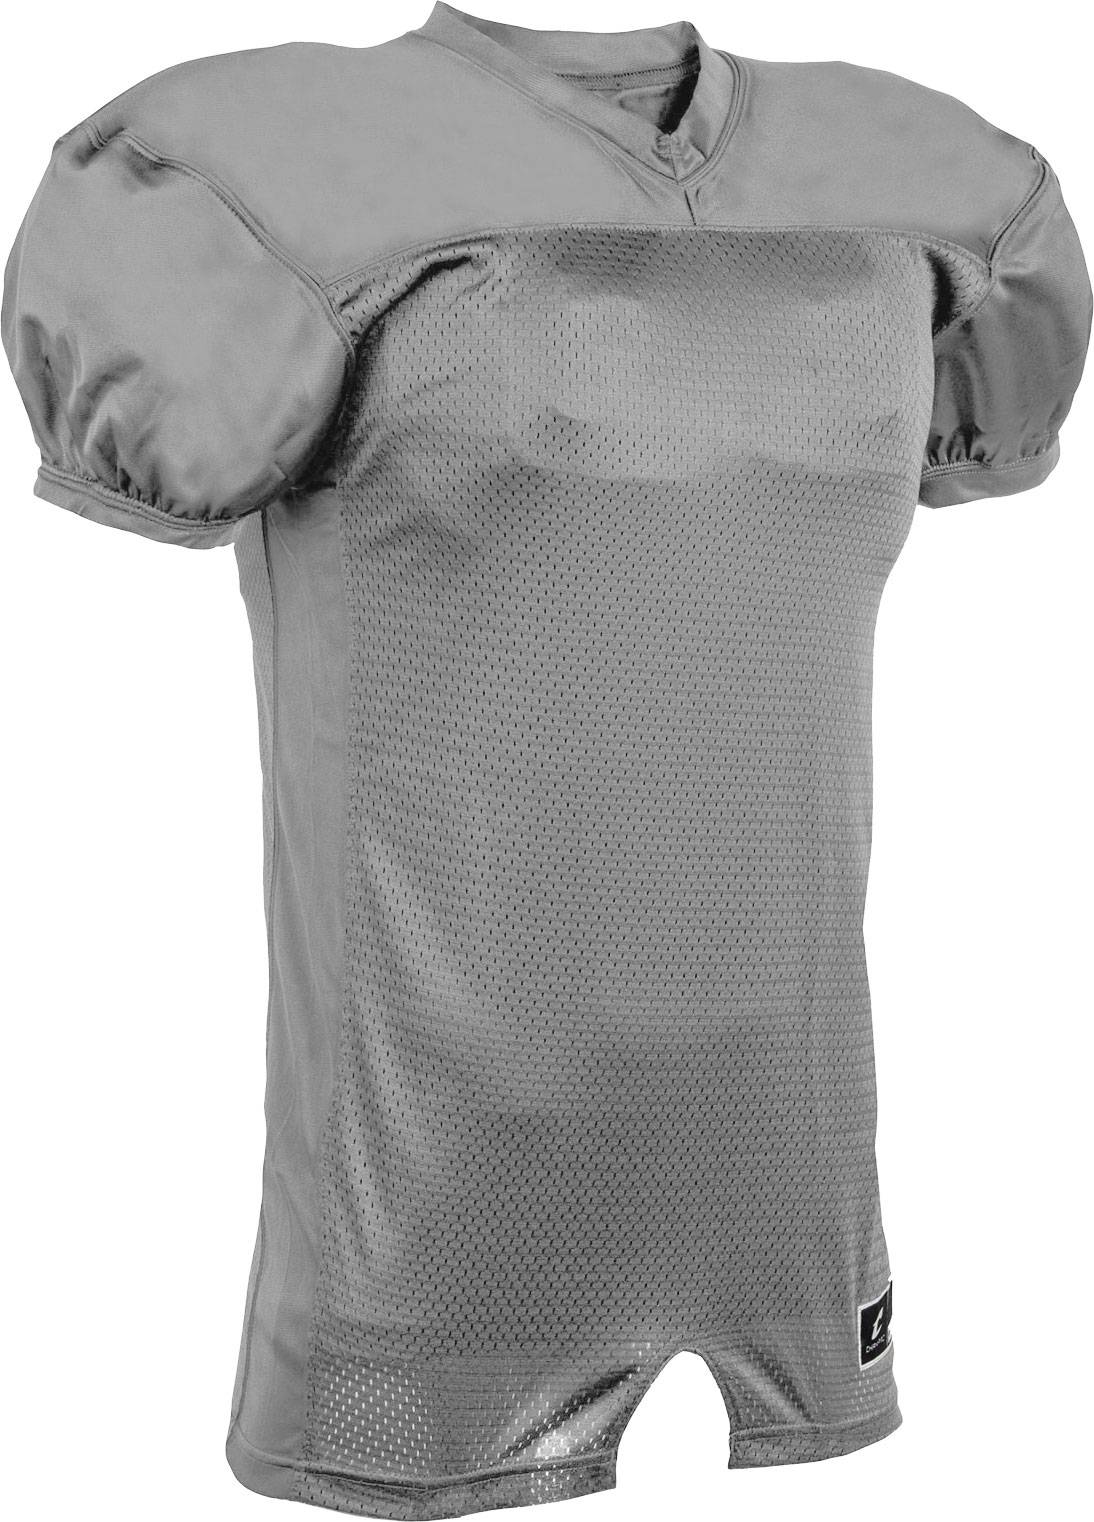 FJ83 Champro Audible Football Jersey Youth Sizes Multiple Colors Available 